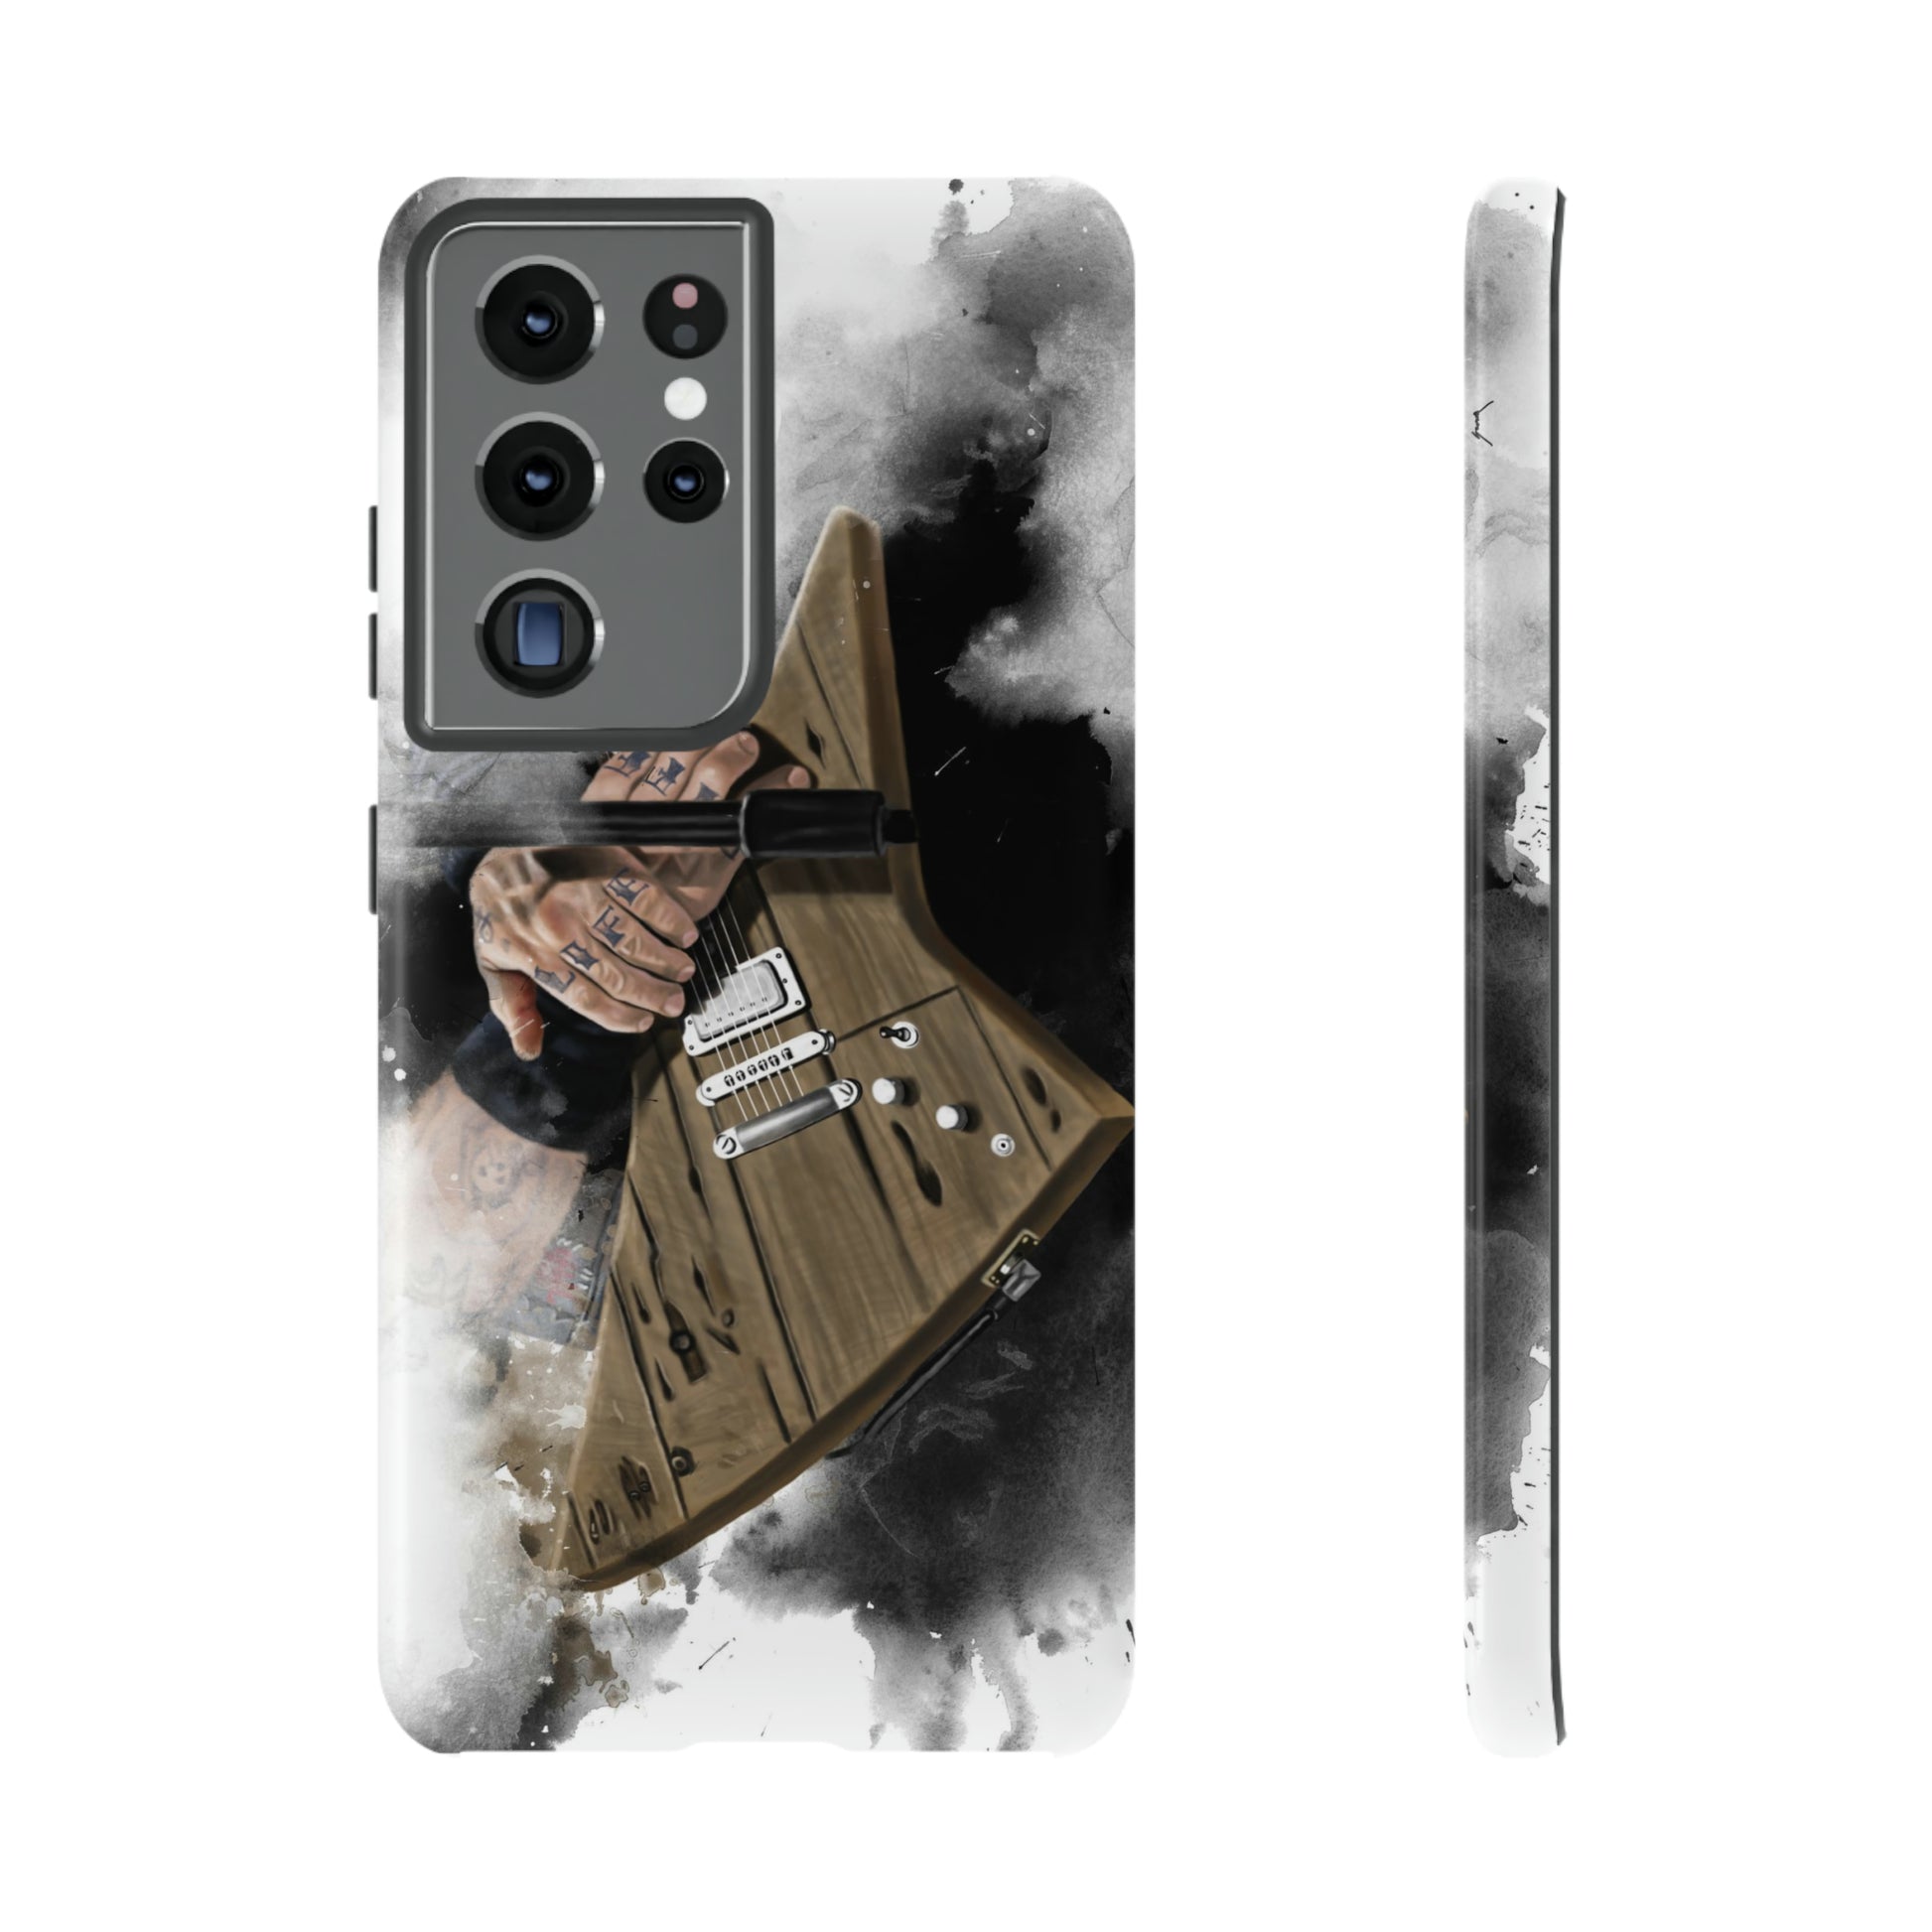 Digital painting of a brown electric guitar with hands printed on a samsung phone case